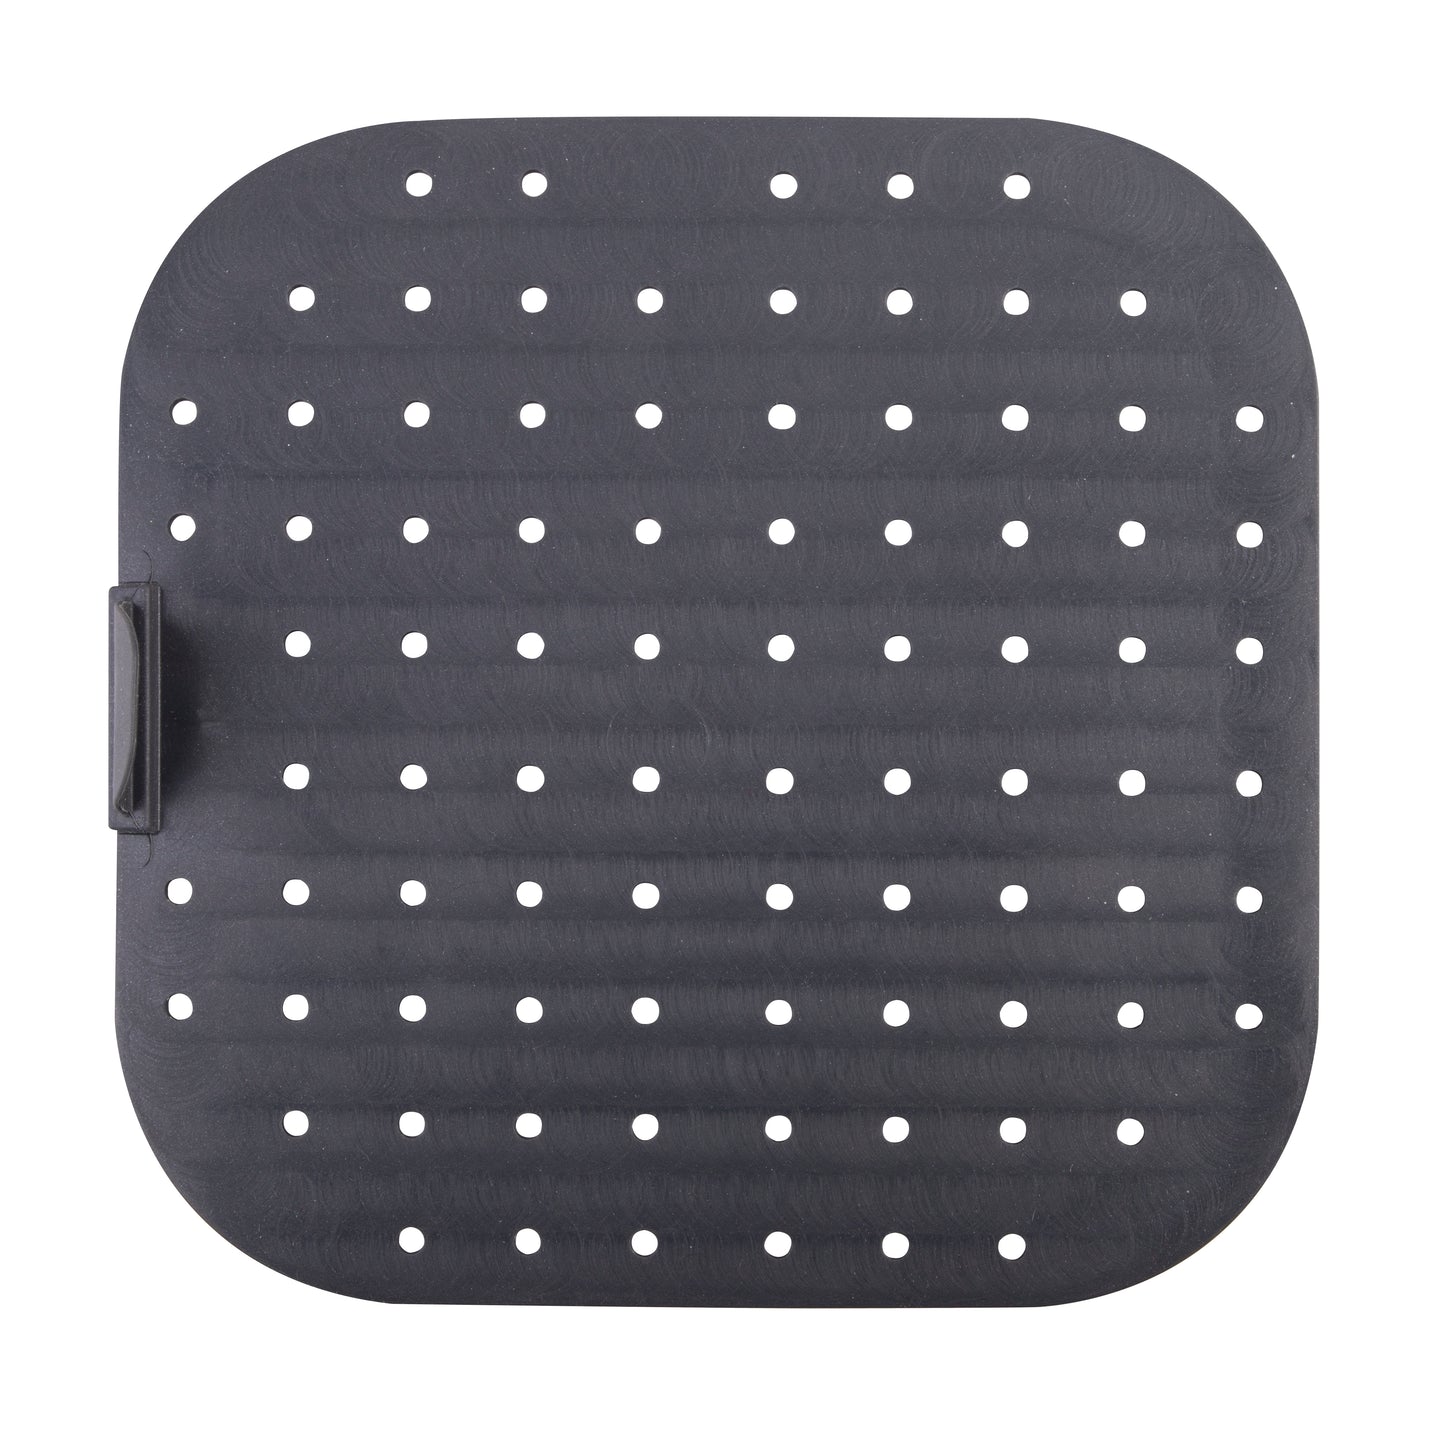 Silicone Square Air Fryer Liner 22cm